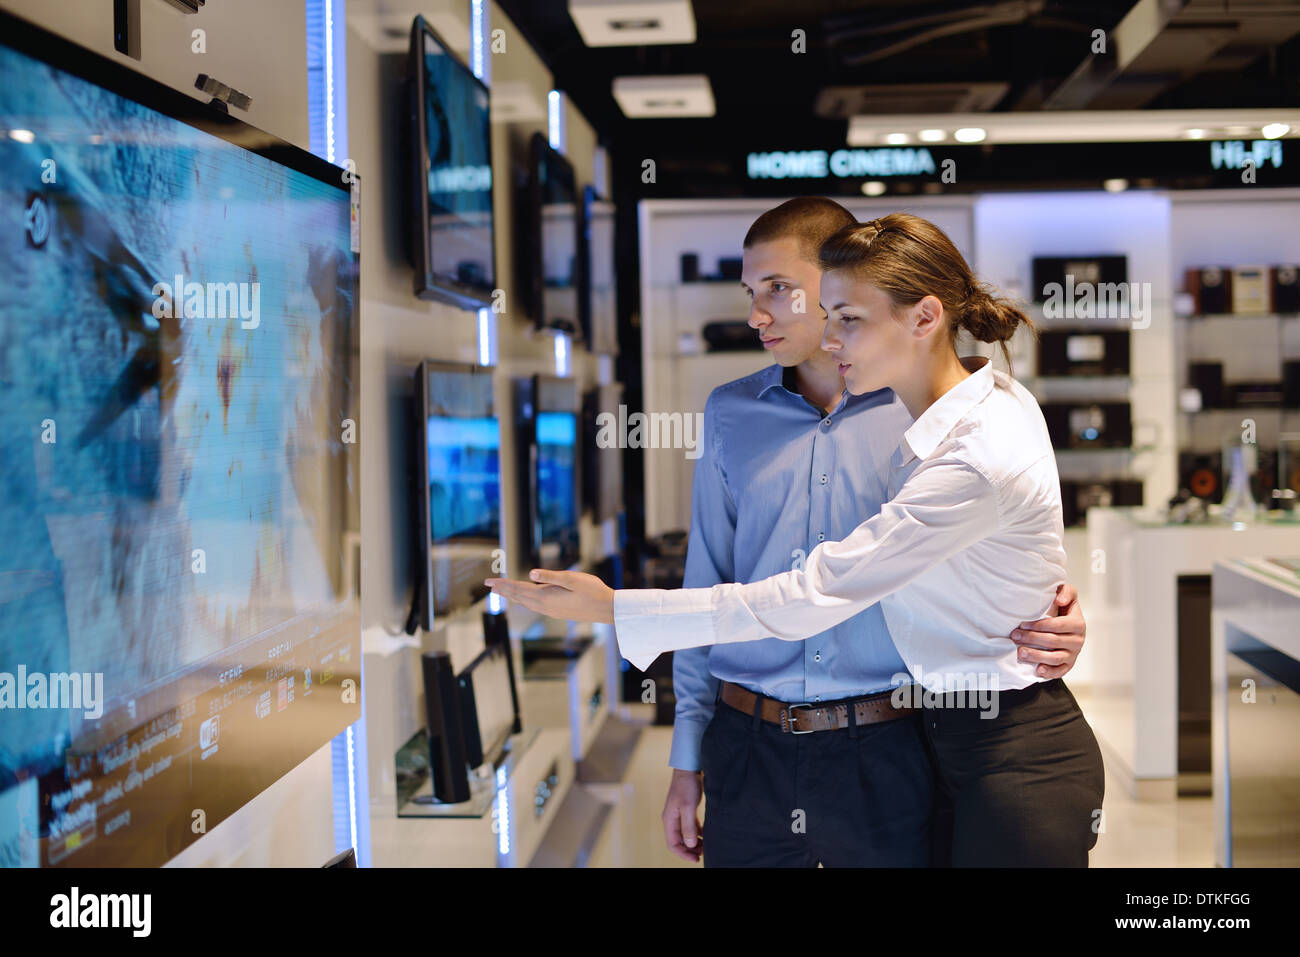 Young couple in consumer electronics store Stock Photo